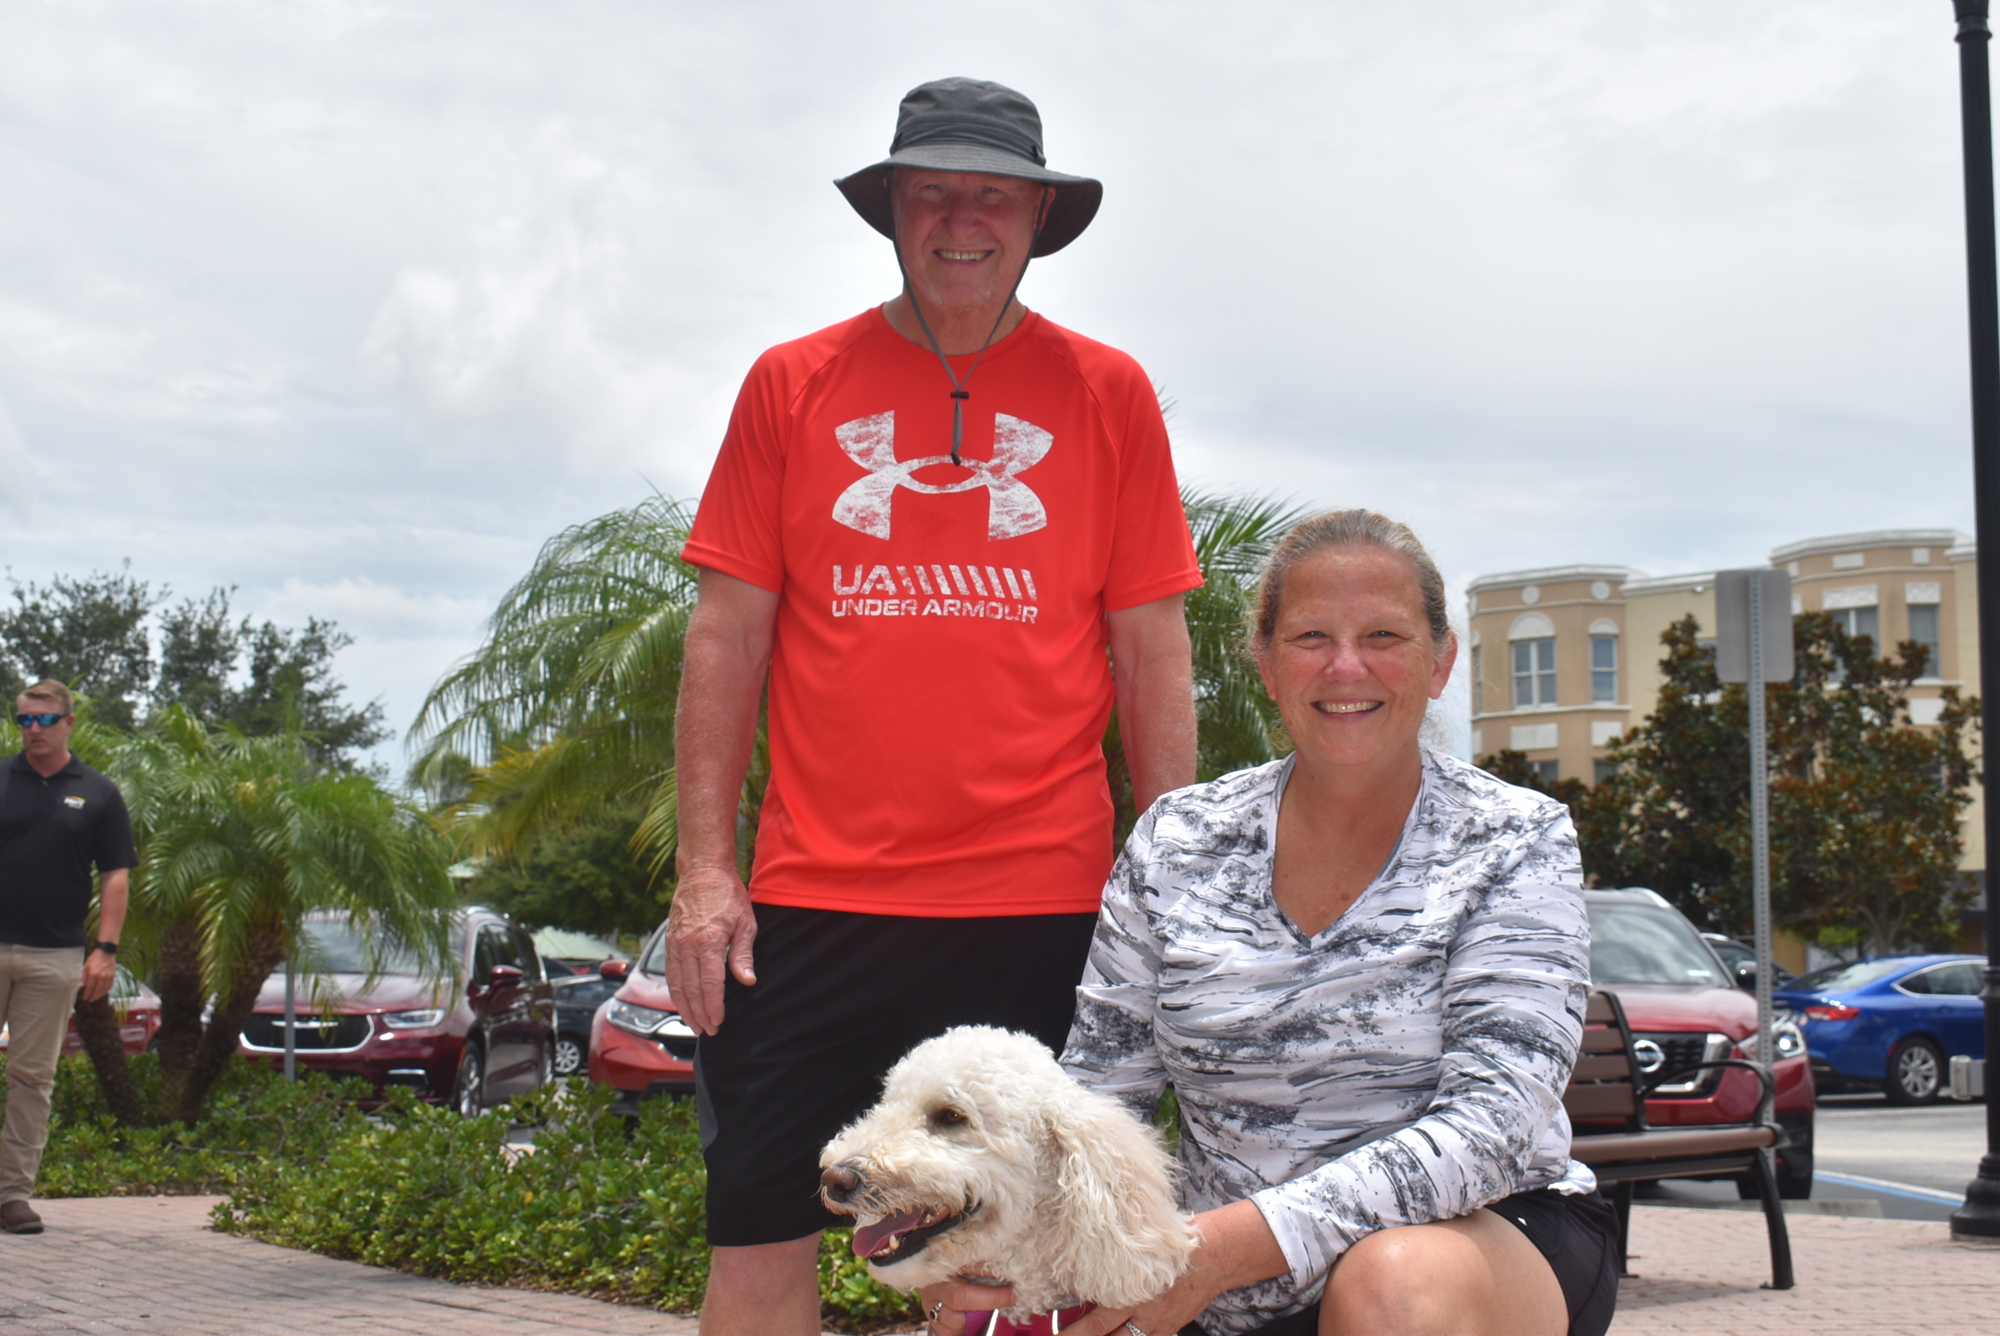 Indigo residents Ron and Lori Lezarescu, pictured with 4-year-old goldendoodle, Gracie, are excited to spend the Fourth in the area for the first time after moving from Wisconsin.